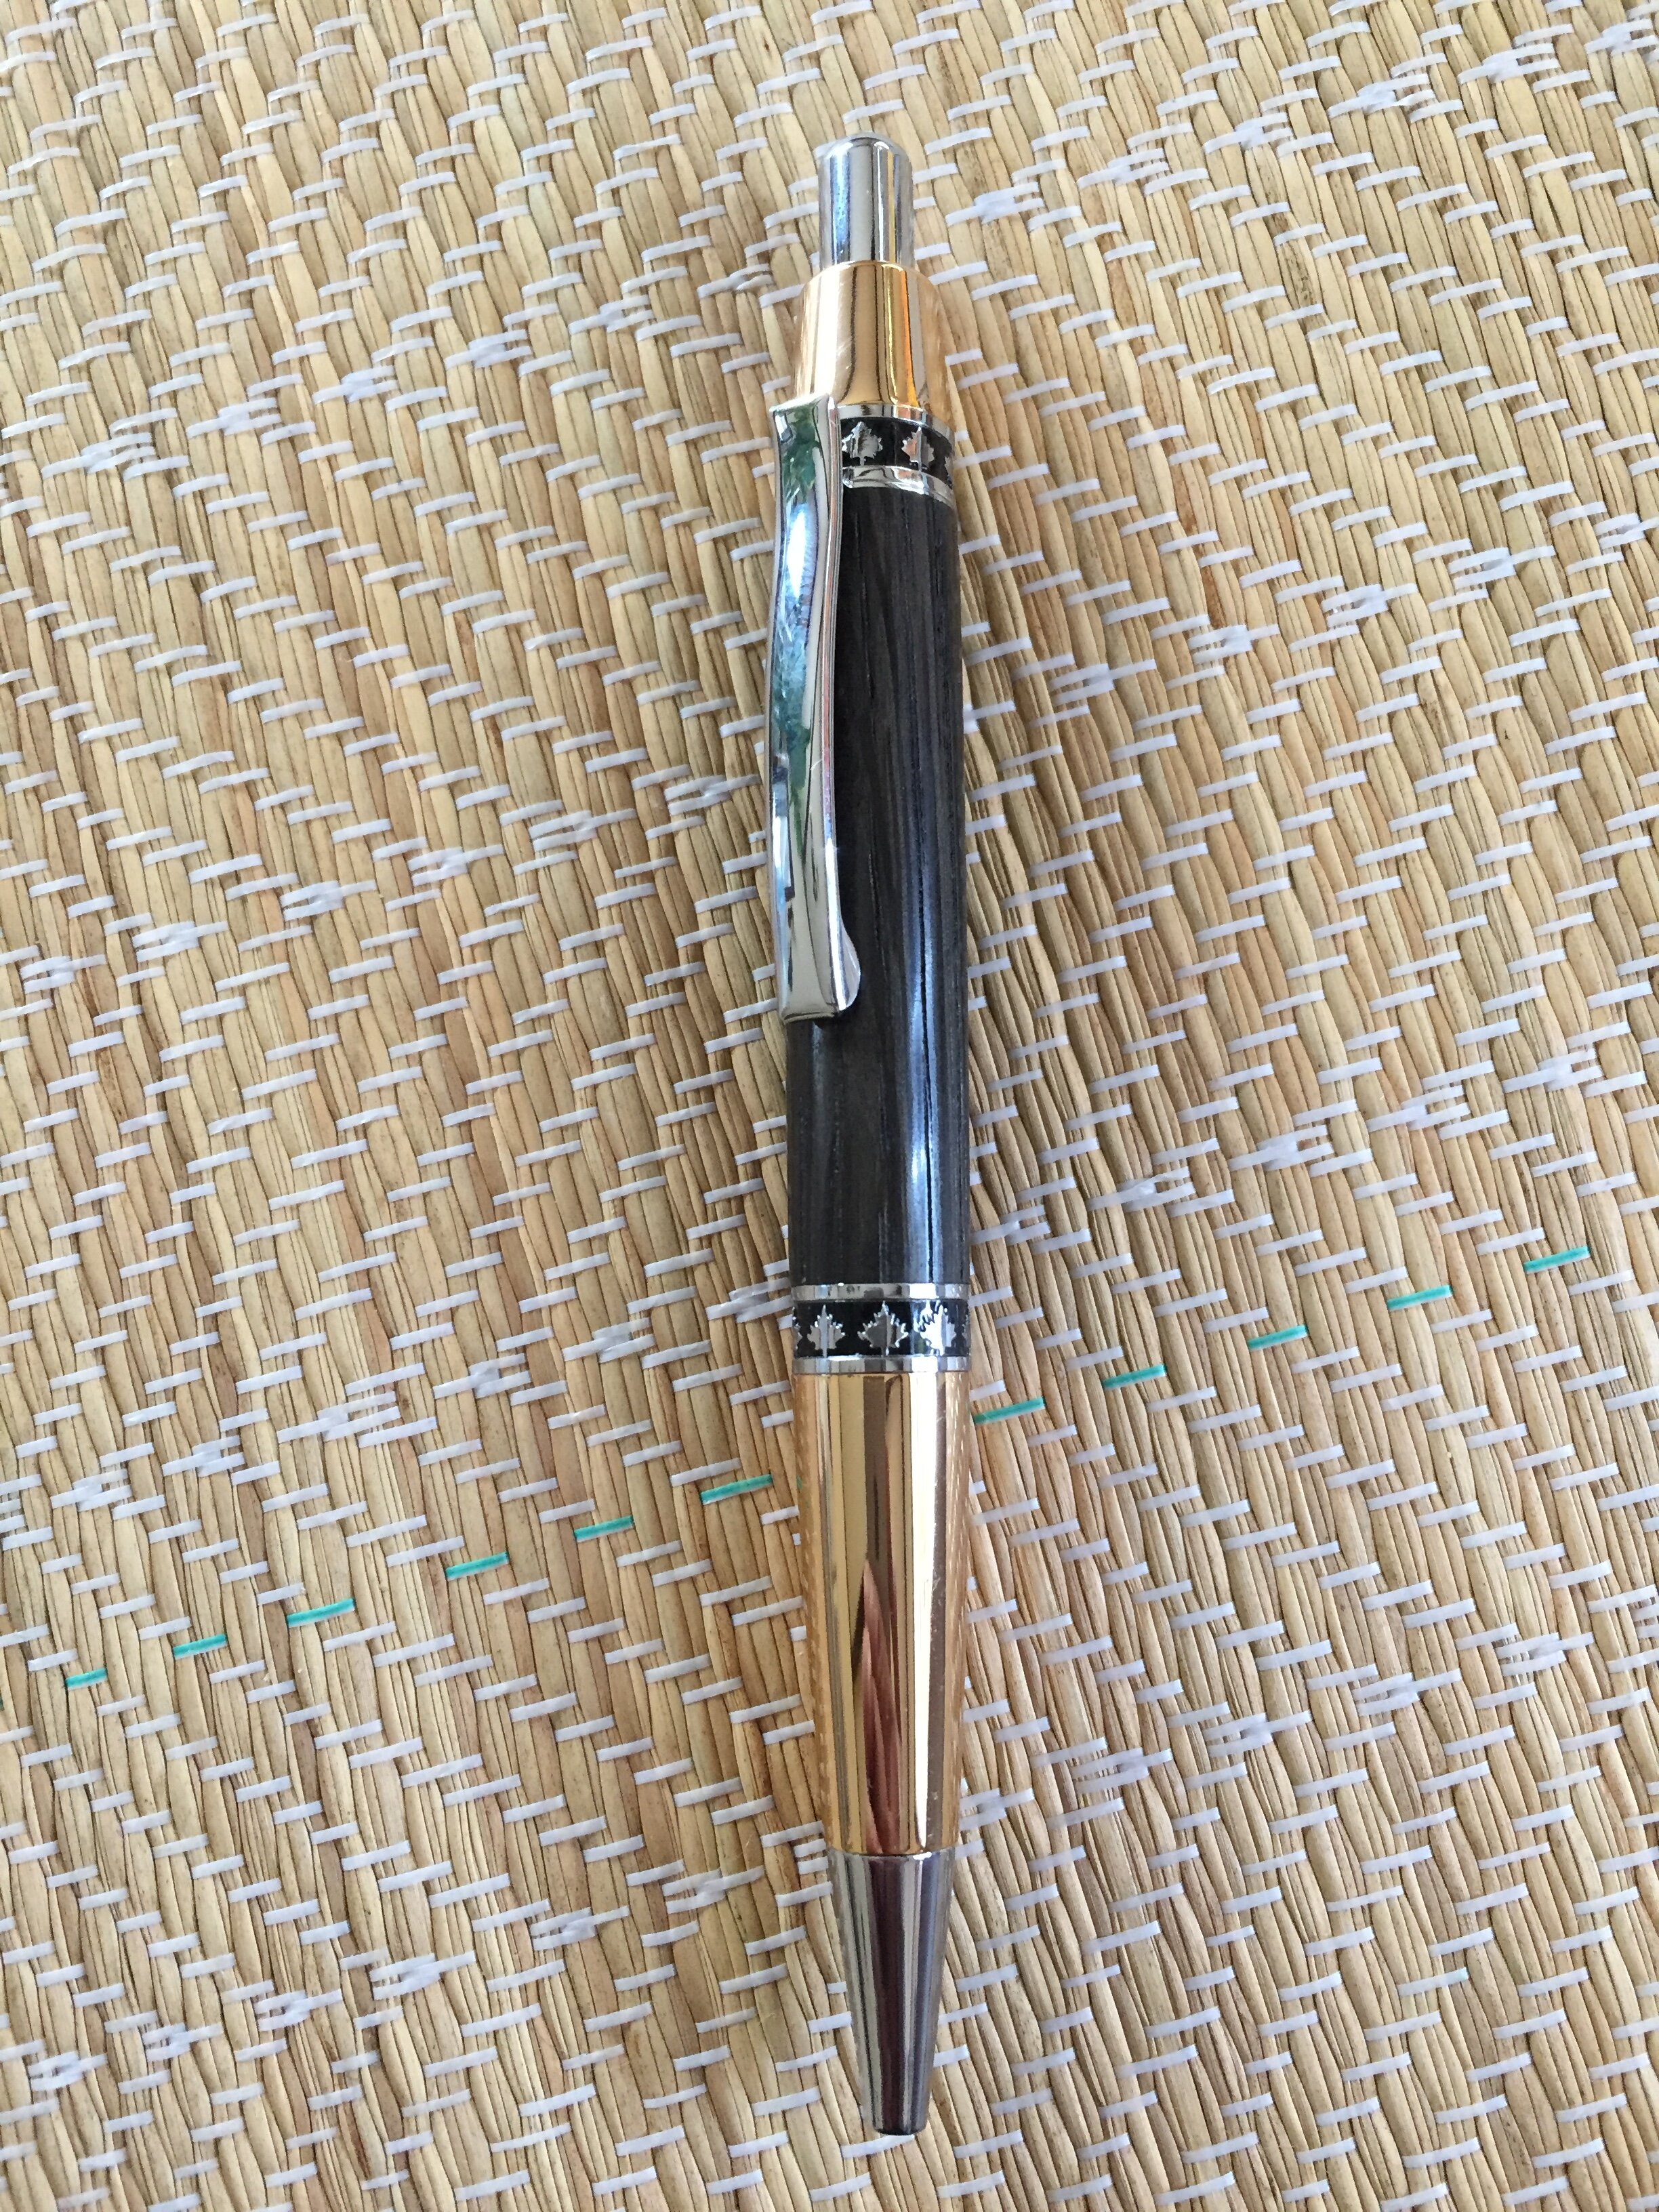 ABO on Sierra Maple in Gold Ti from William Wood Write